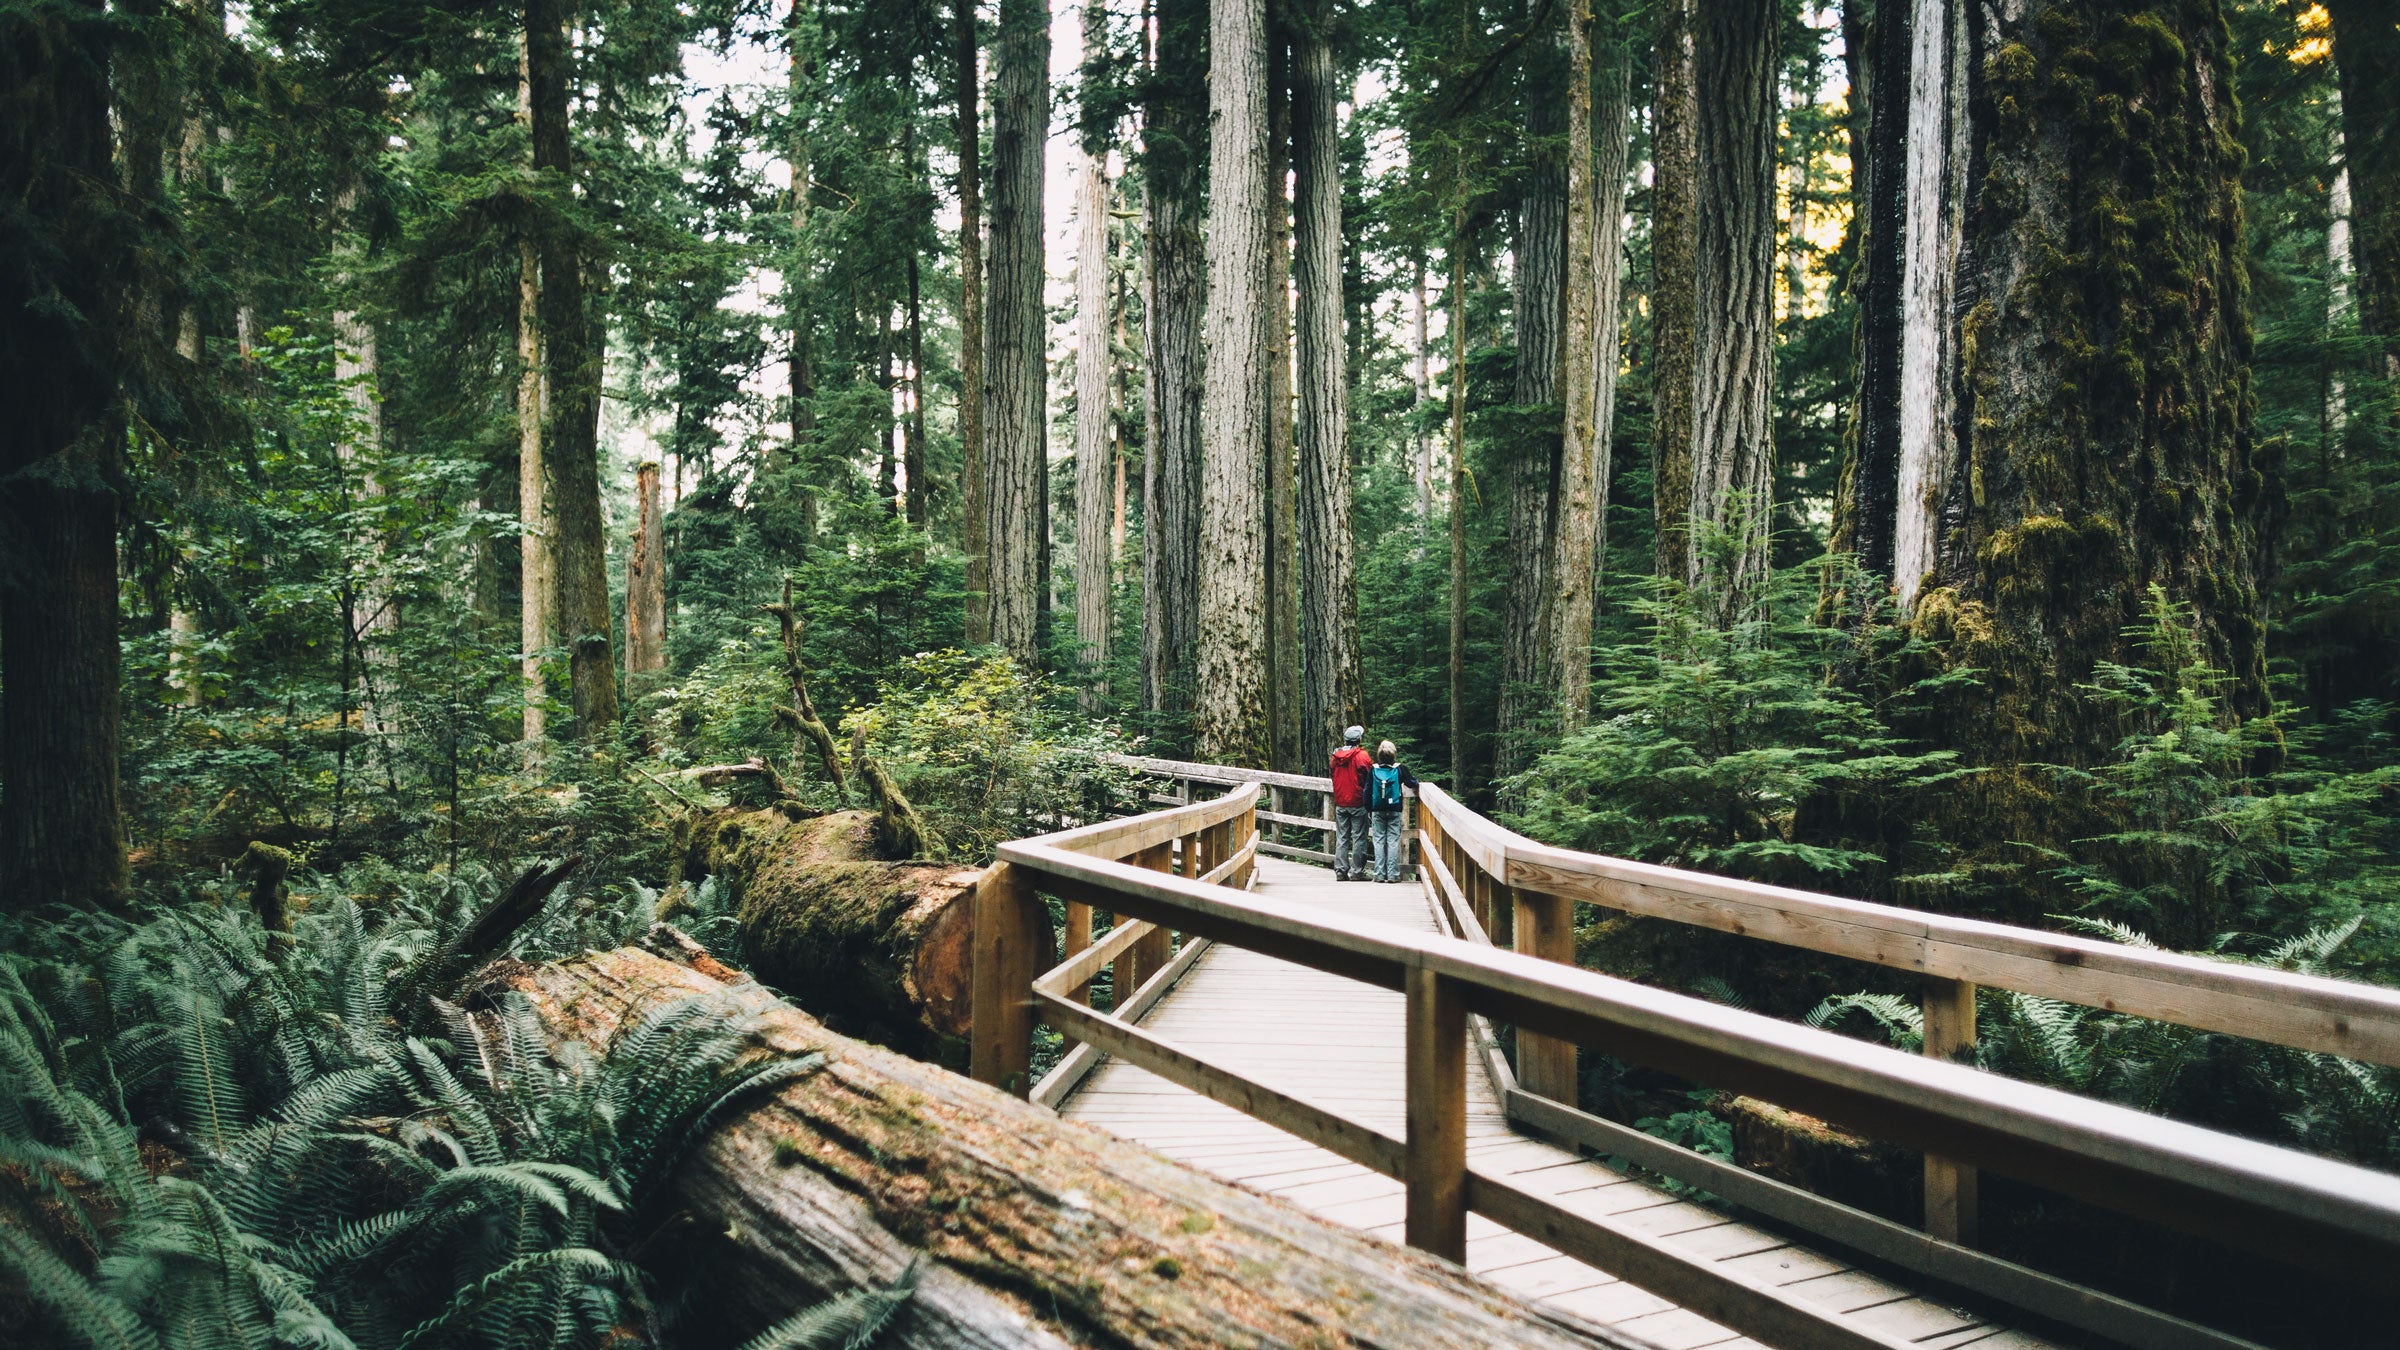 https://cdn.outsideonline.com/wp-content/uploads/2019/07/24/british-columbia-effect-old-growth-forest_h.jpg